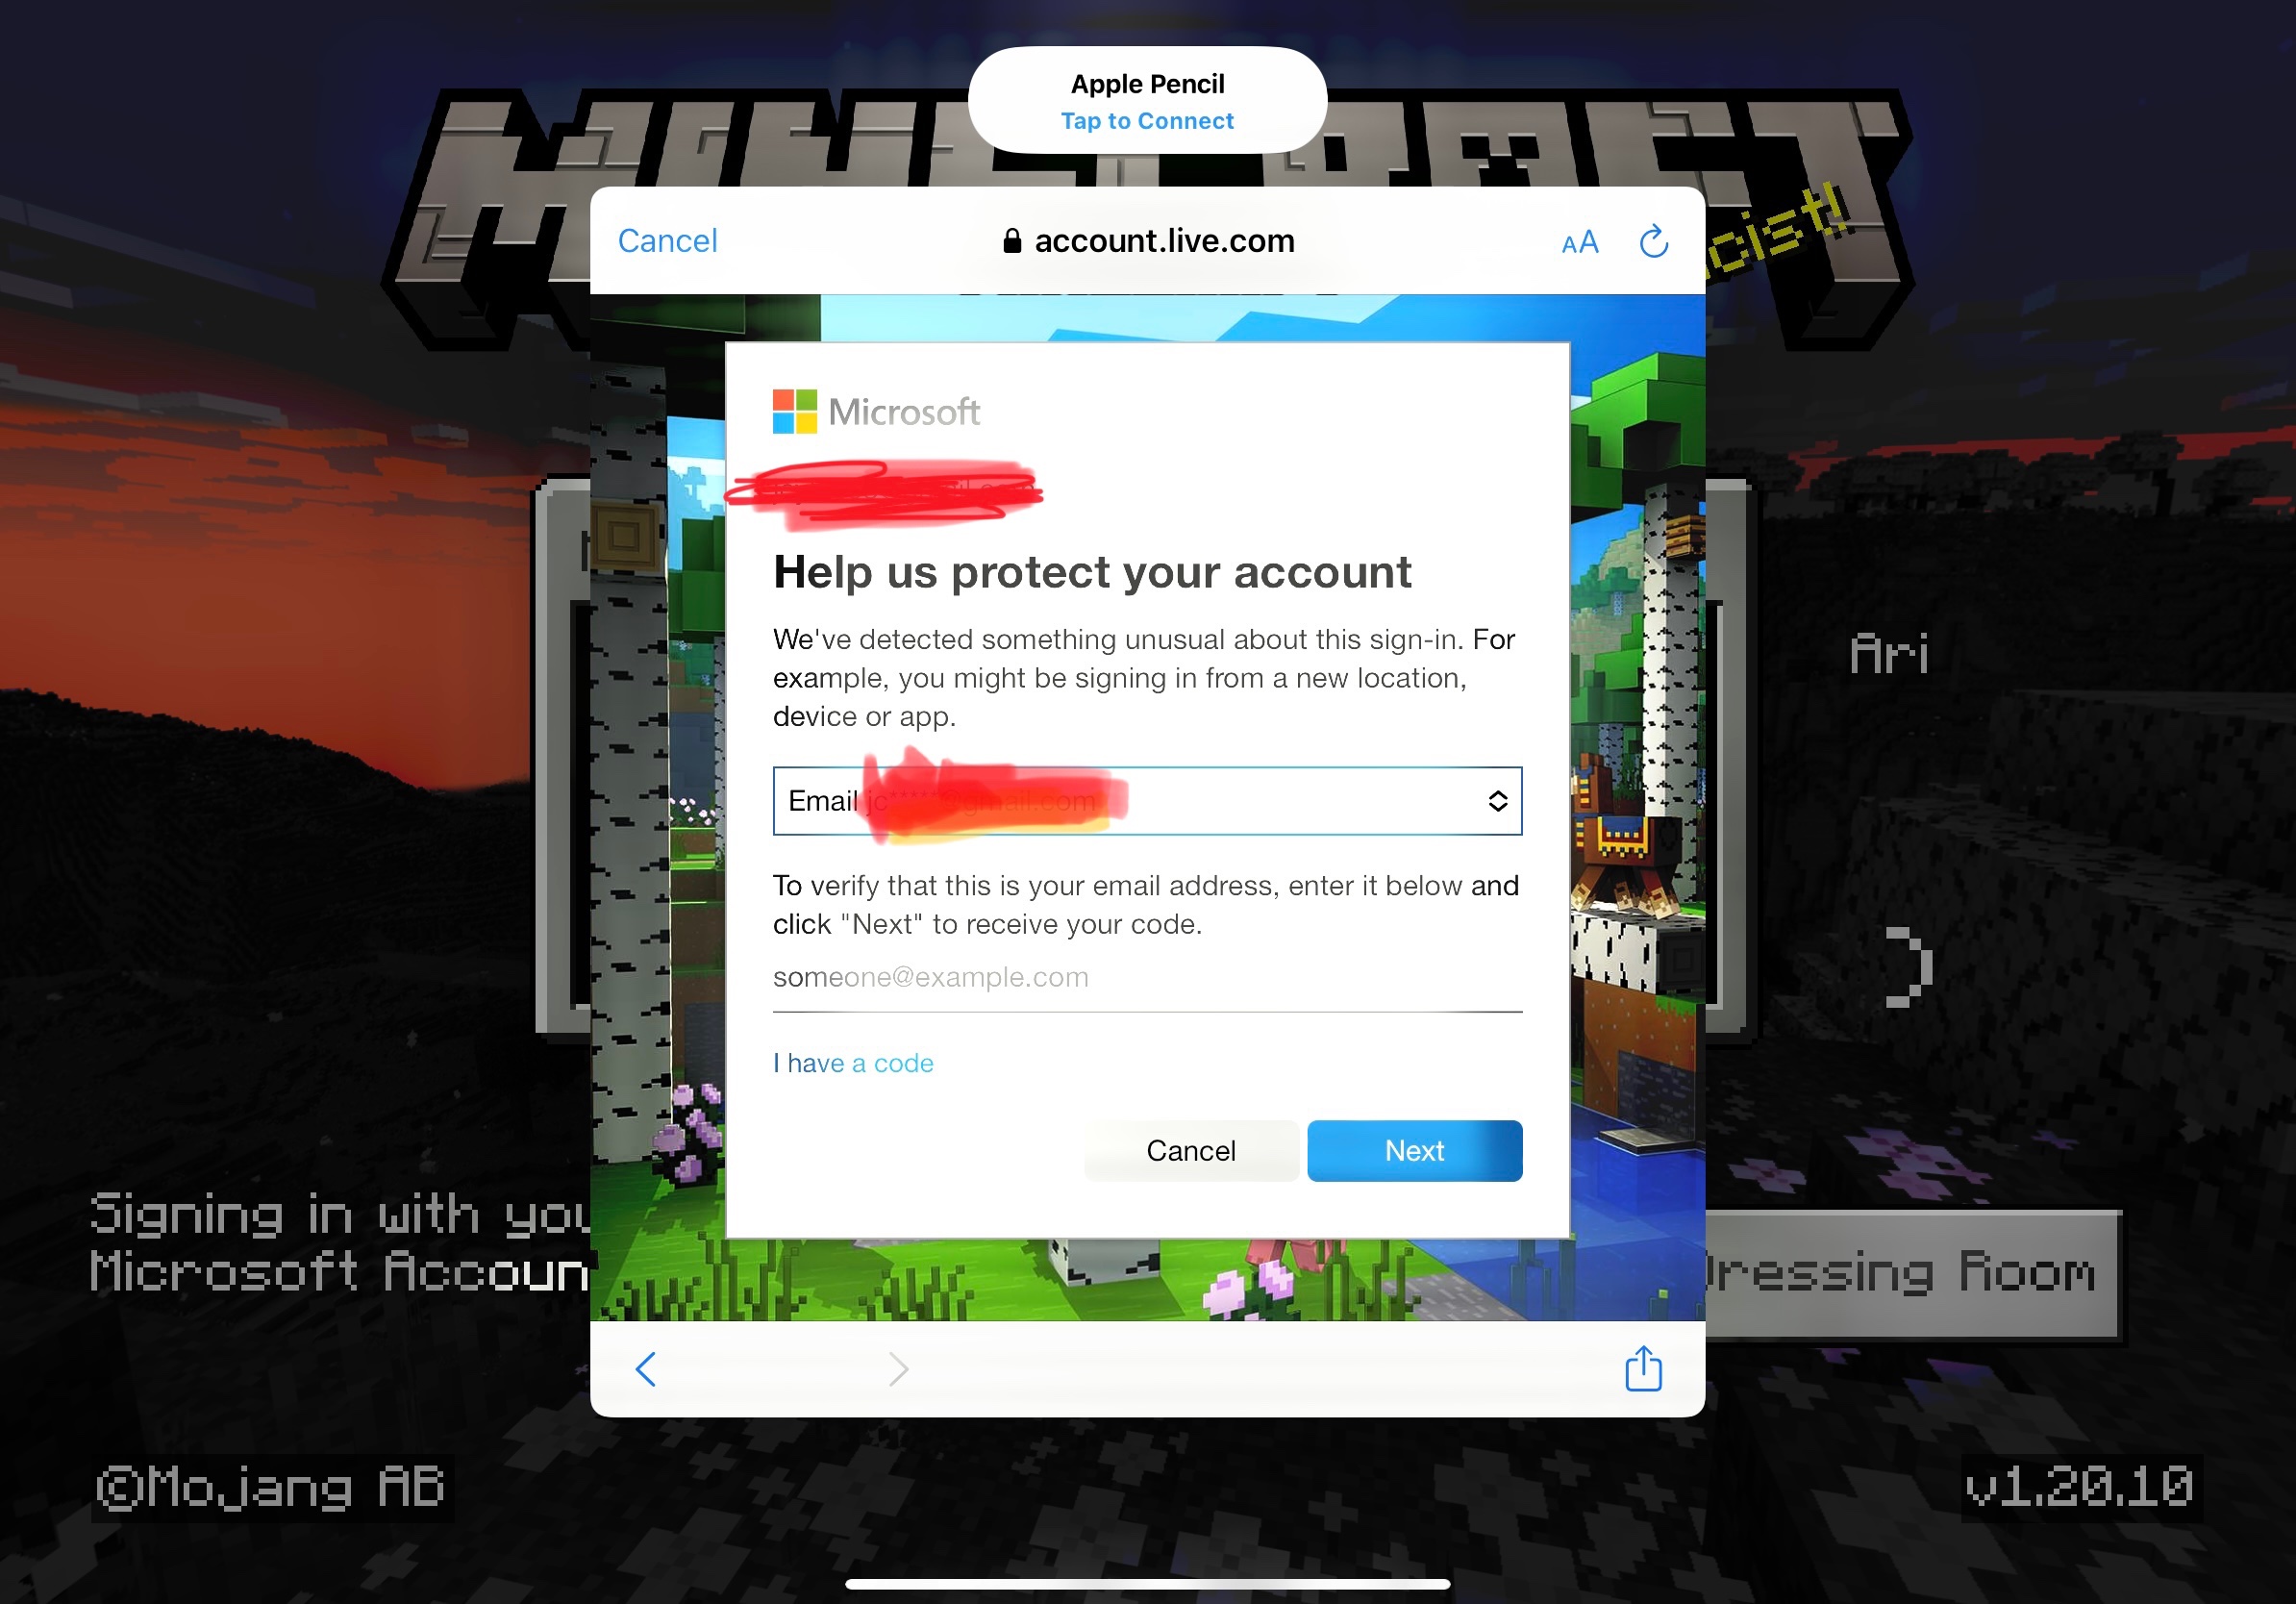 Can't sign into Minecraft using Microsoft - Microsoft Community